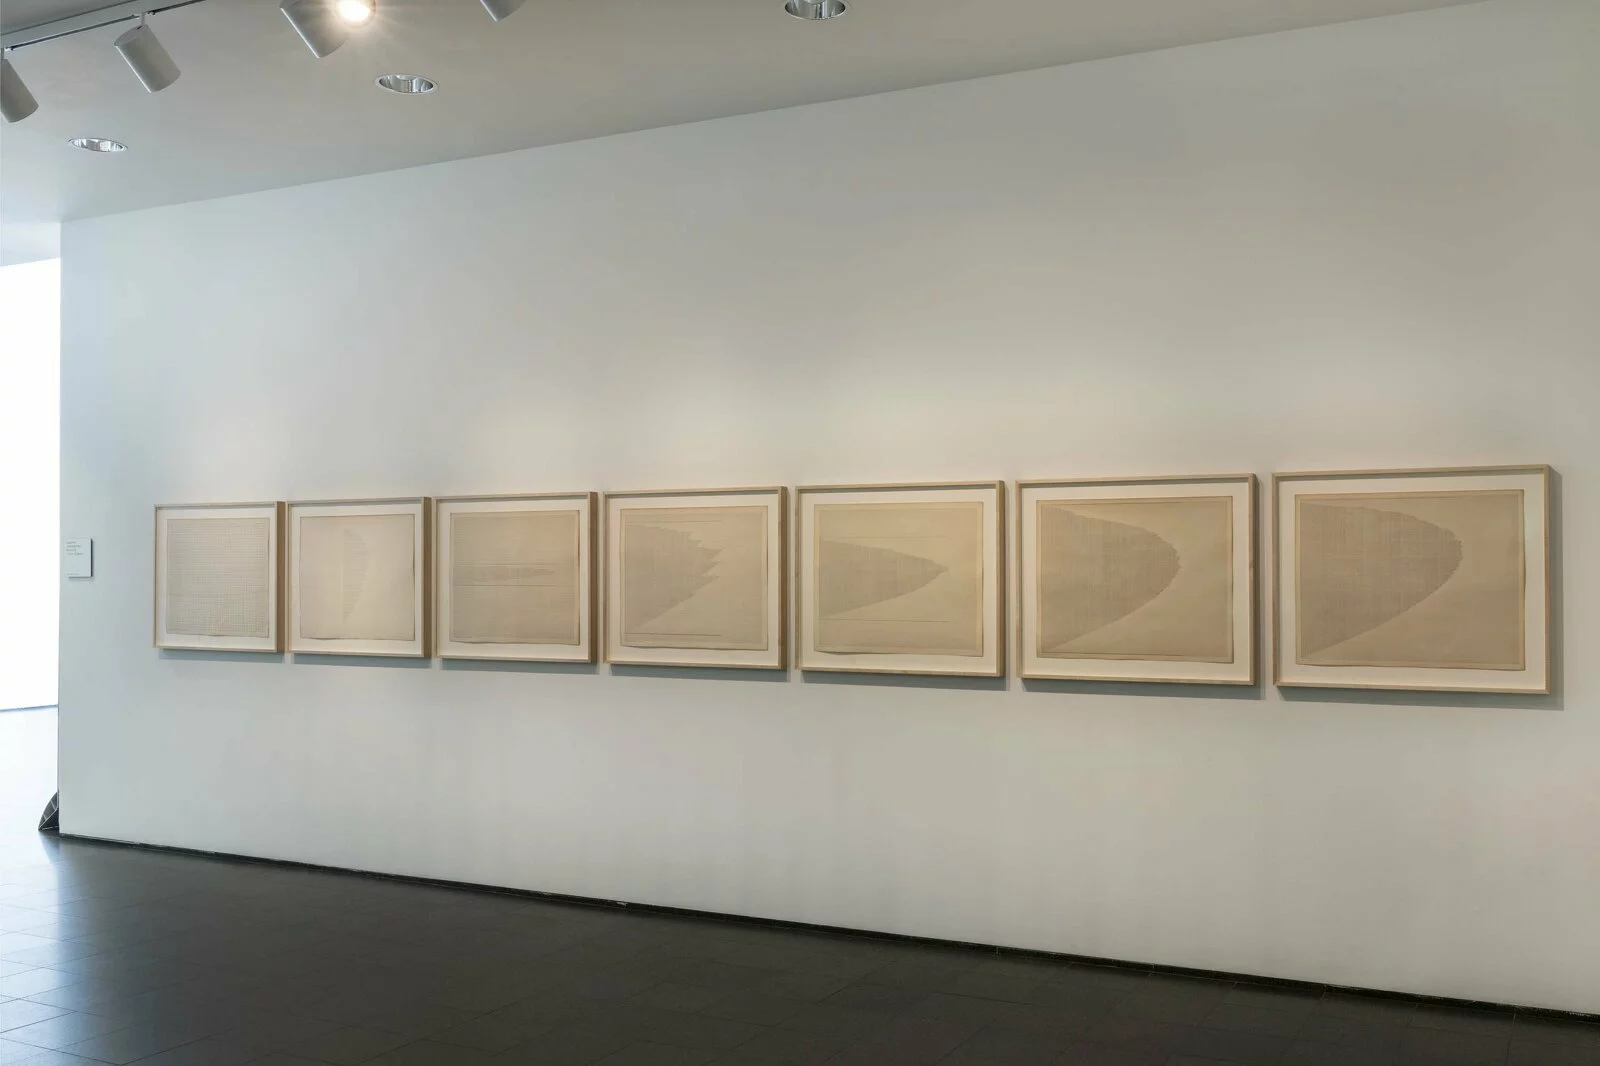 Seven artworks in light wooden frames hang on a white wall in a low-lit space.